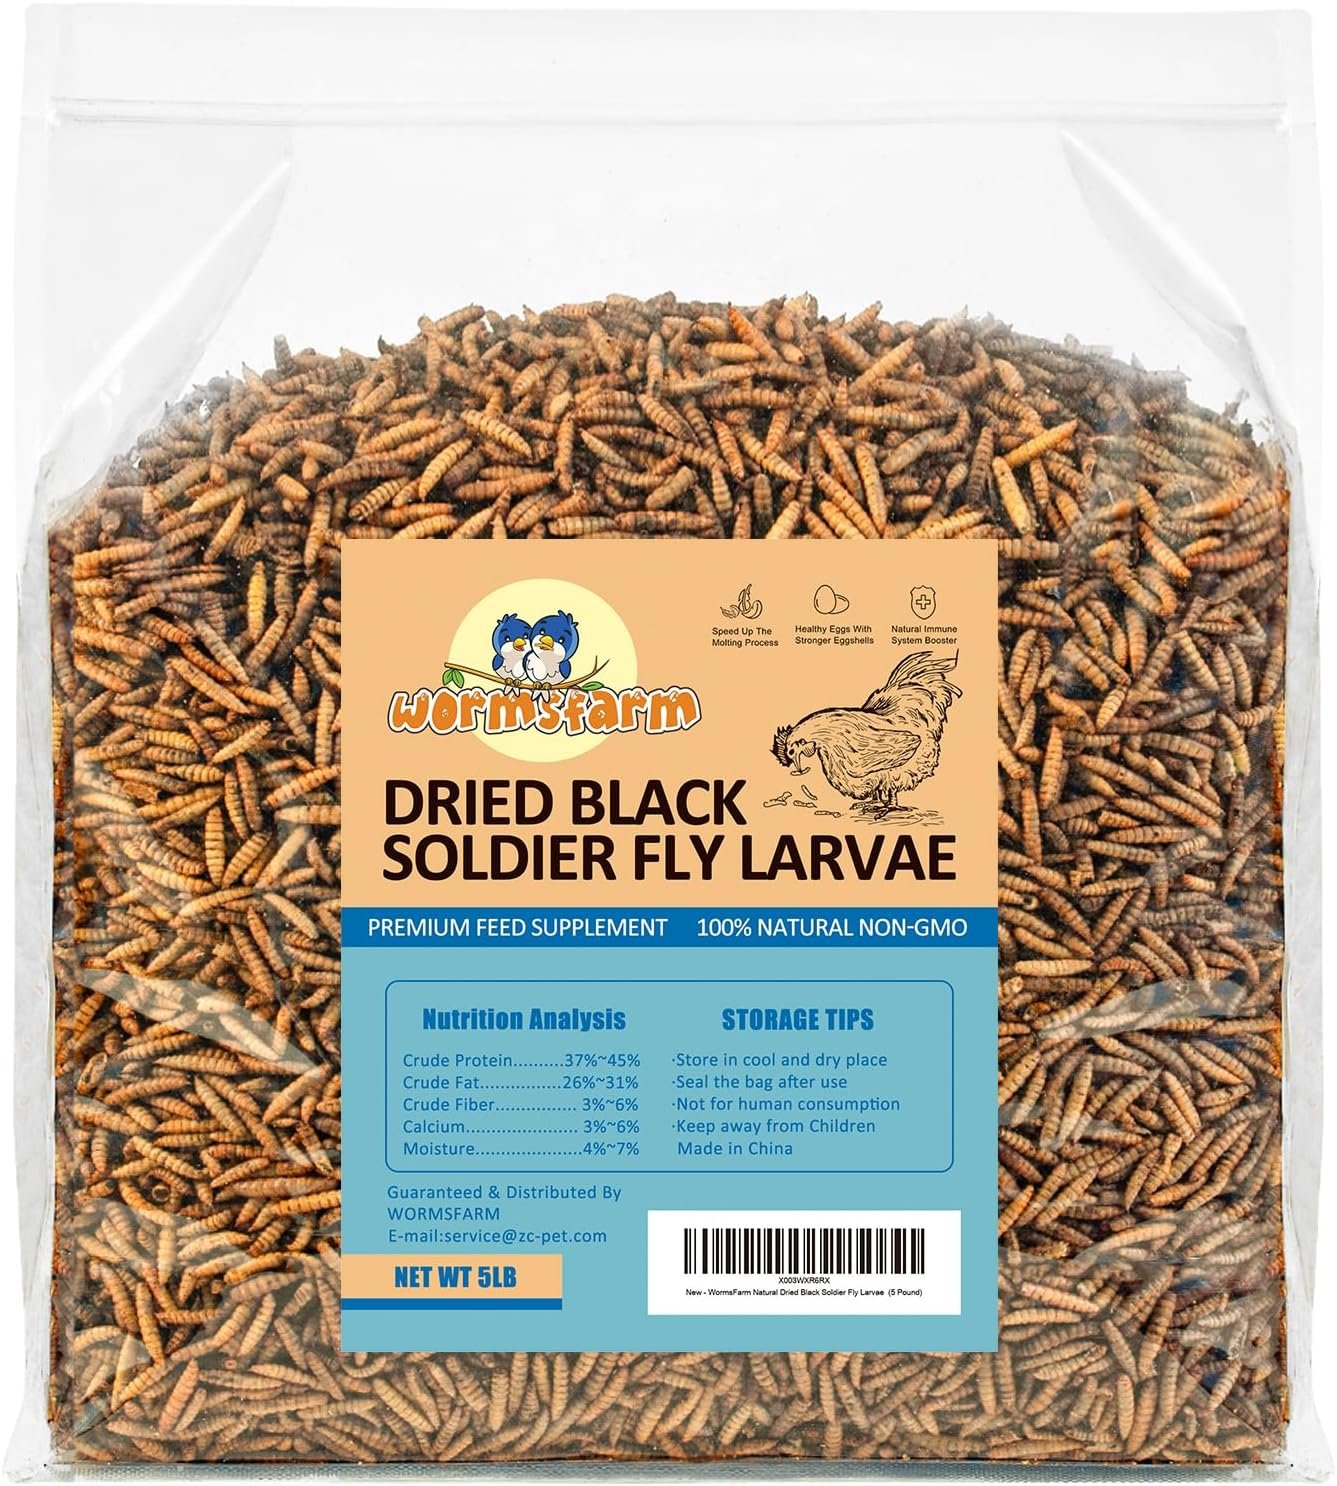 WormsFarm 5LB Black Soldier Fly Larvae for Chicken 85× More Calcium Than Dried MealWorms Treats for Laying Hens,Blue Birds Feeder (5 Pound)